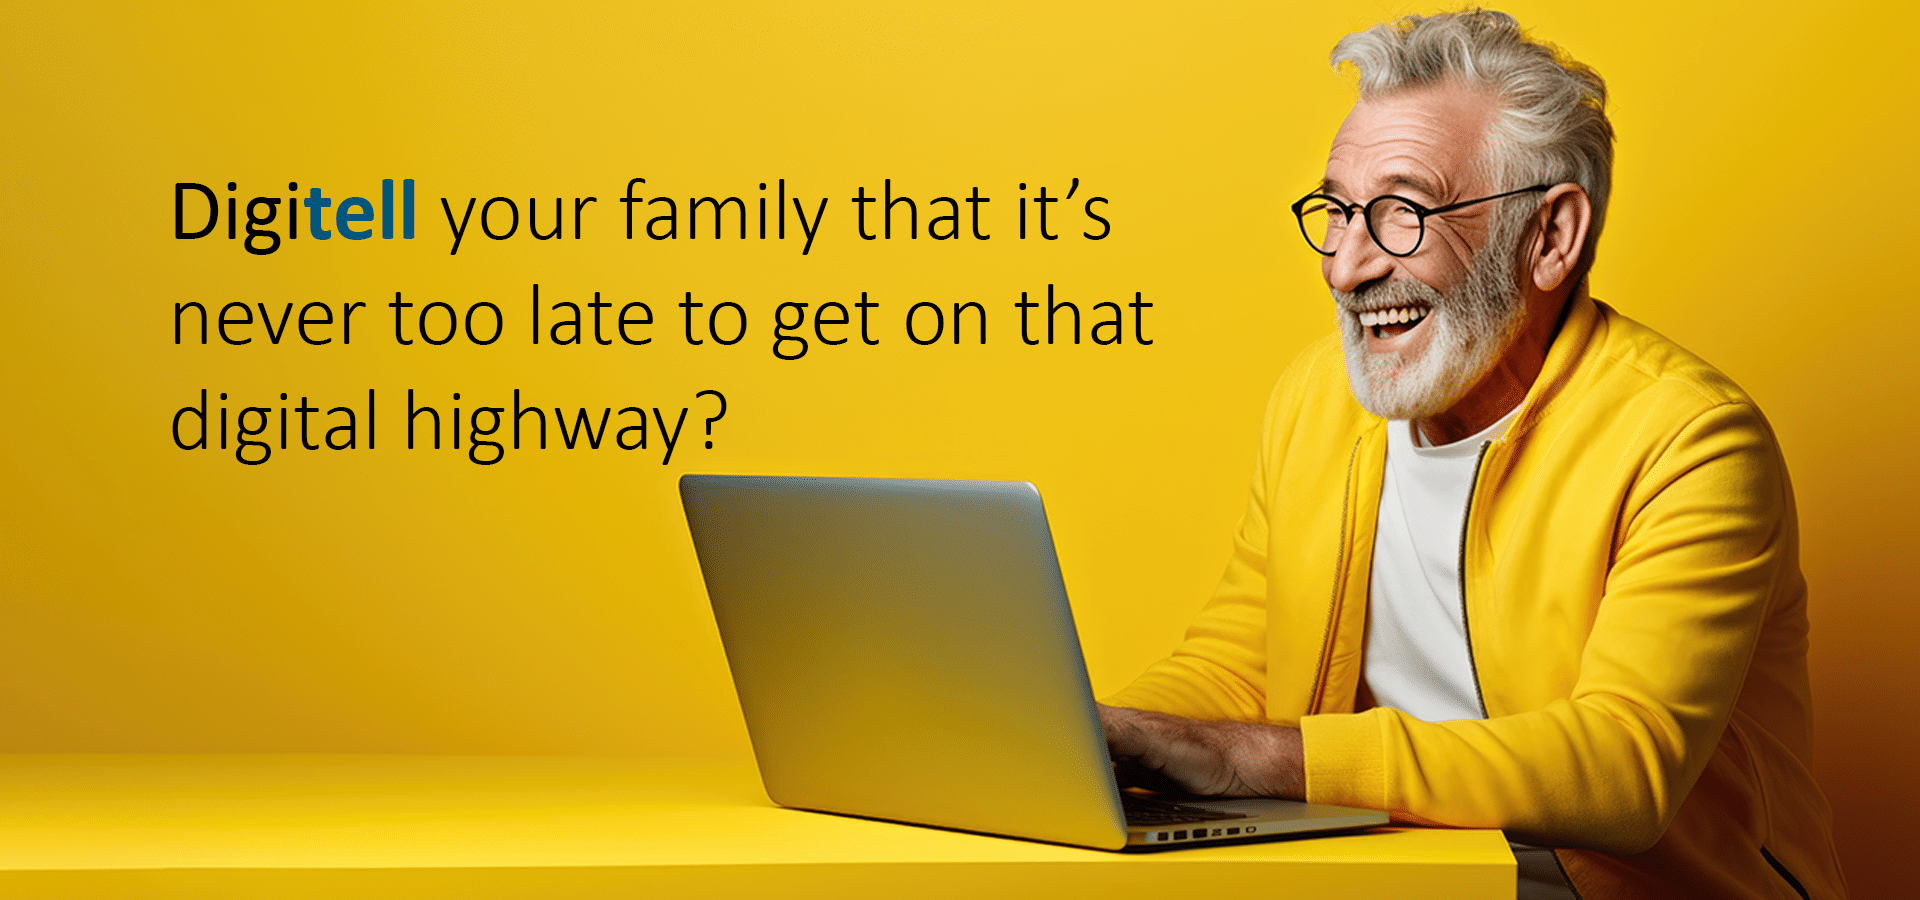 Digitay Graphic saying Digitell your family that it's never too late to get on that digital highway?